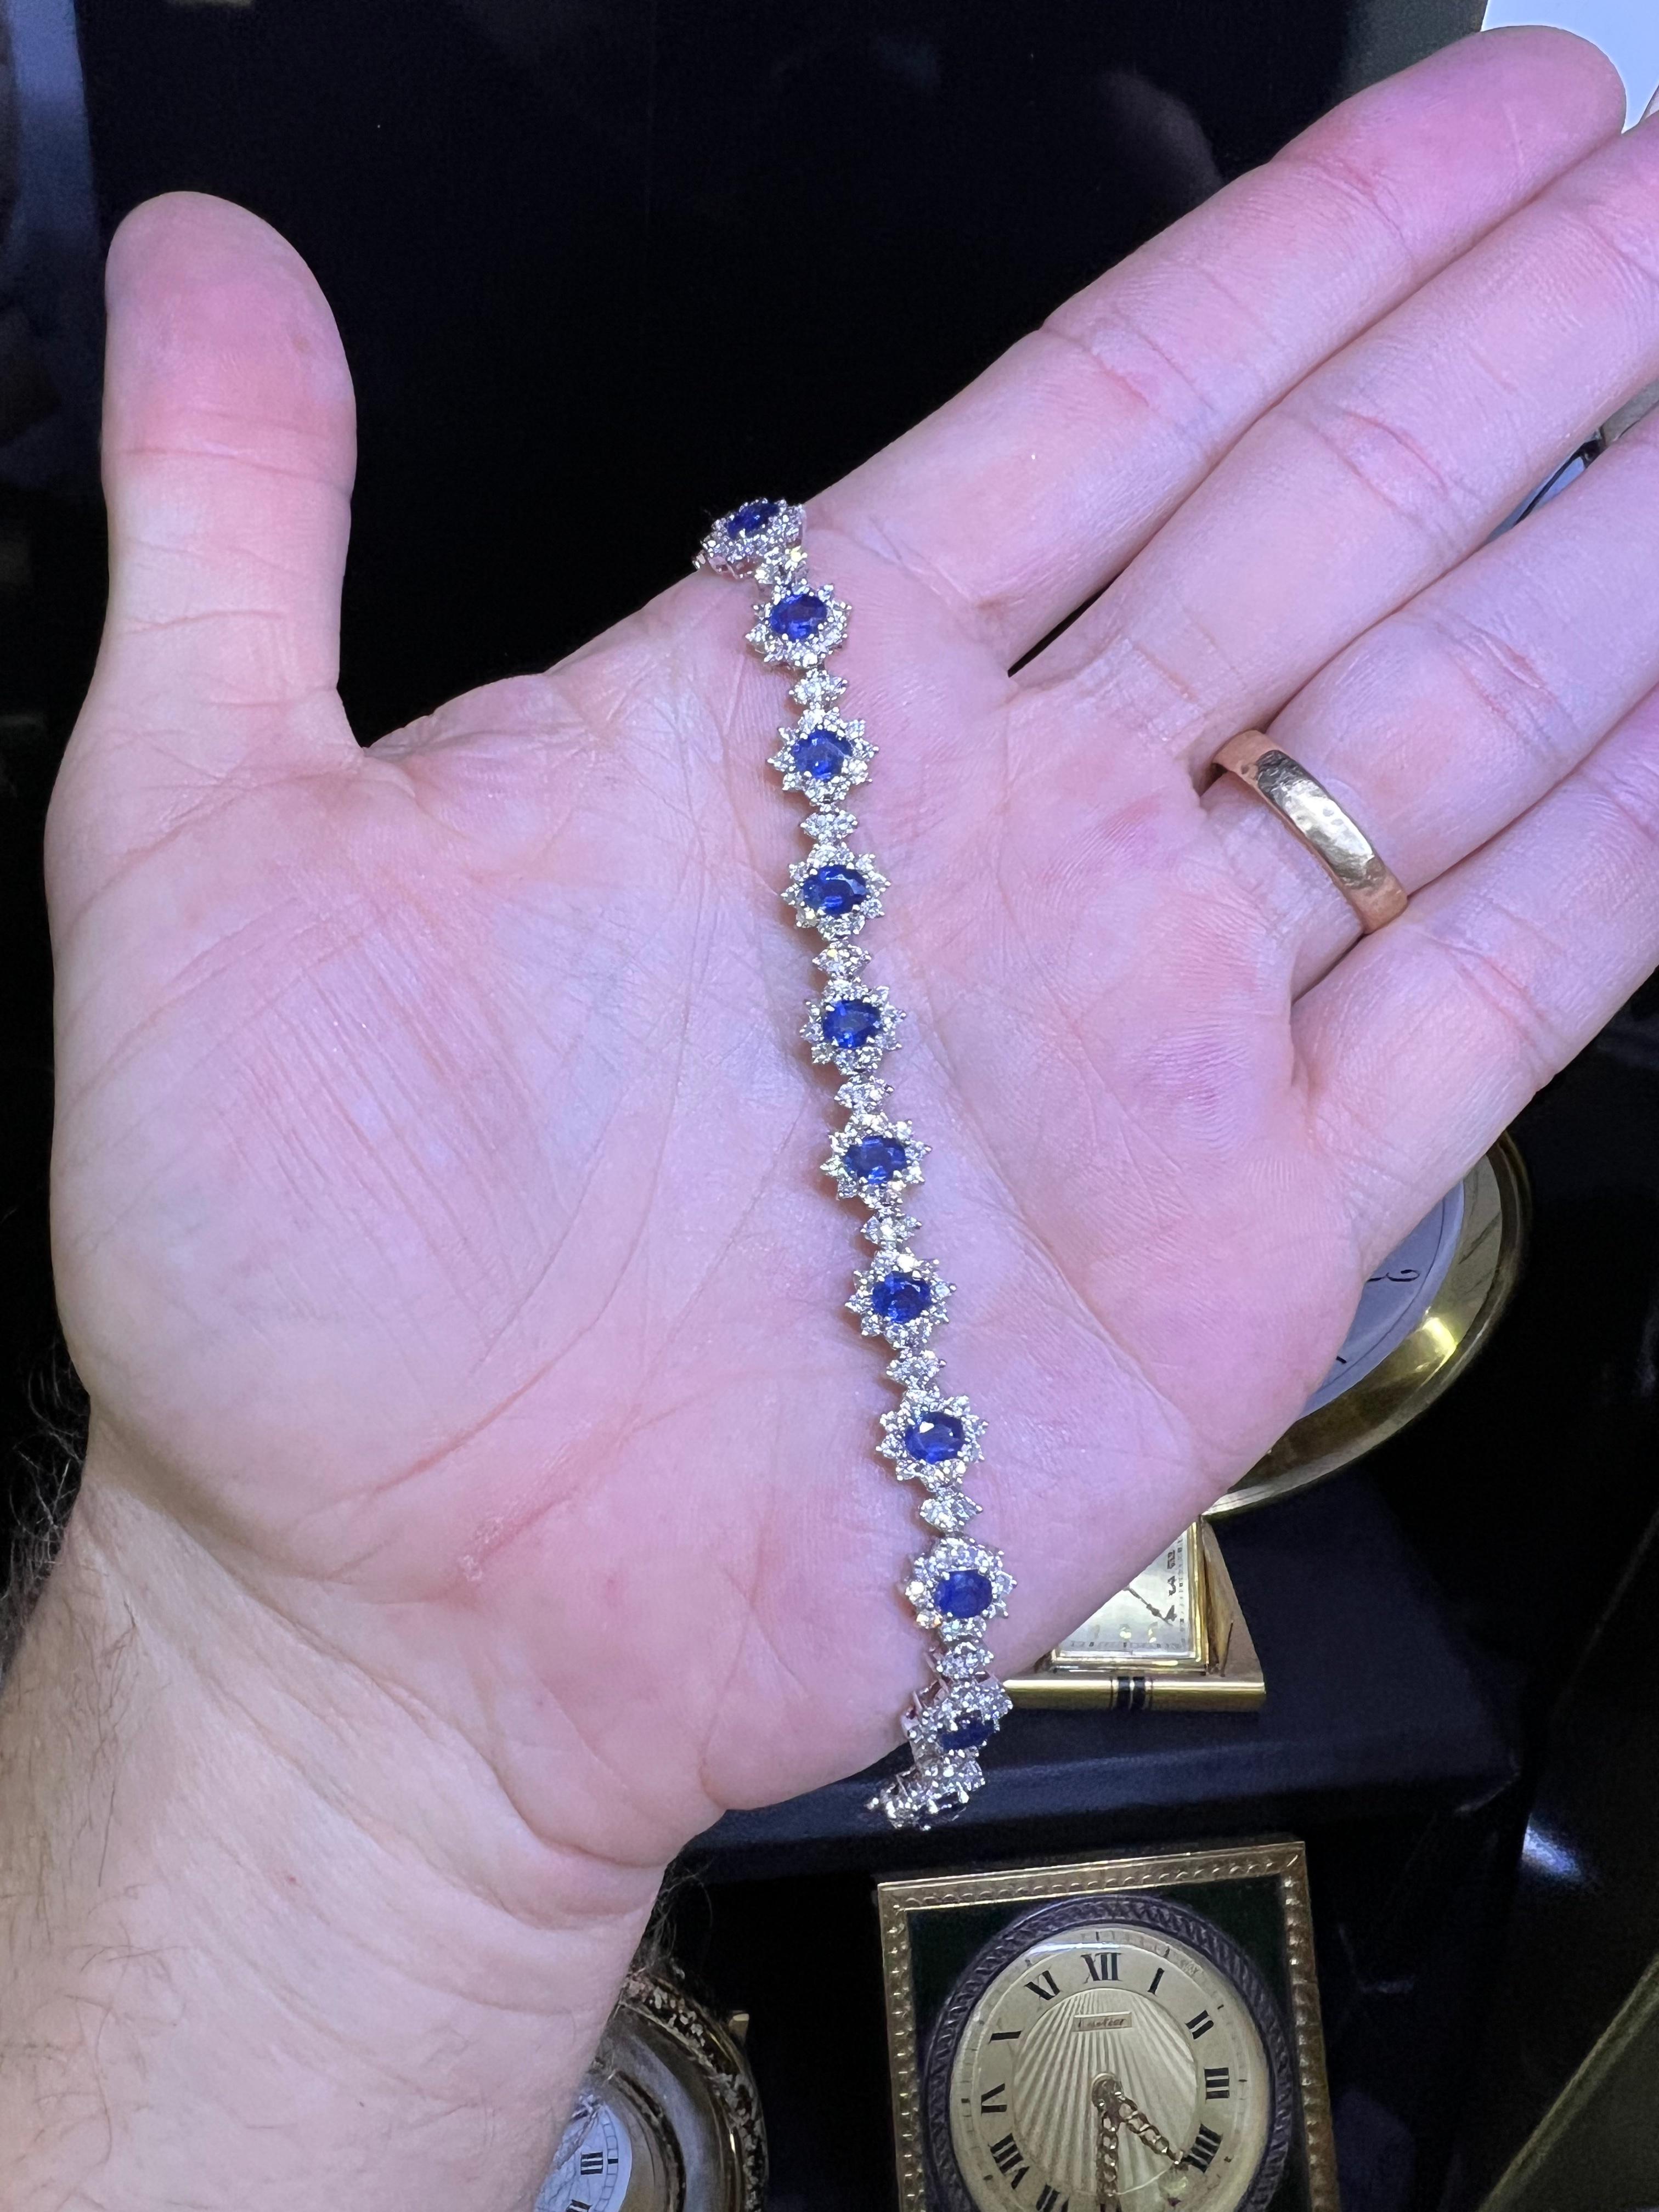 Beautiful bracelet crafted in 18k white gold. The bracelet is set with natural blue sapphires and earth mined natural diamonds. 
The bracelet is set with 6.50 carats of gemstones. The diamonds highlight the design showing scintillation throughout as